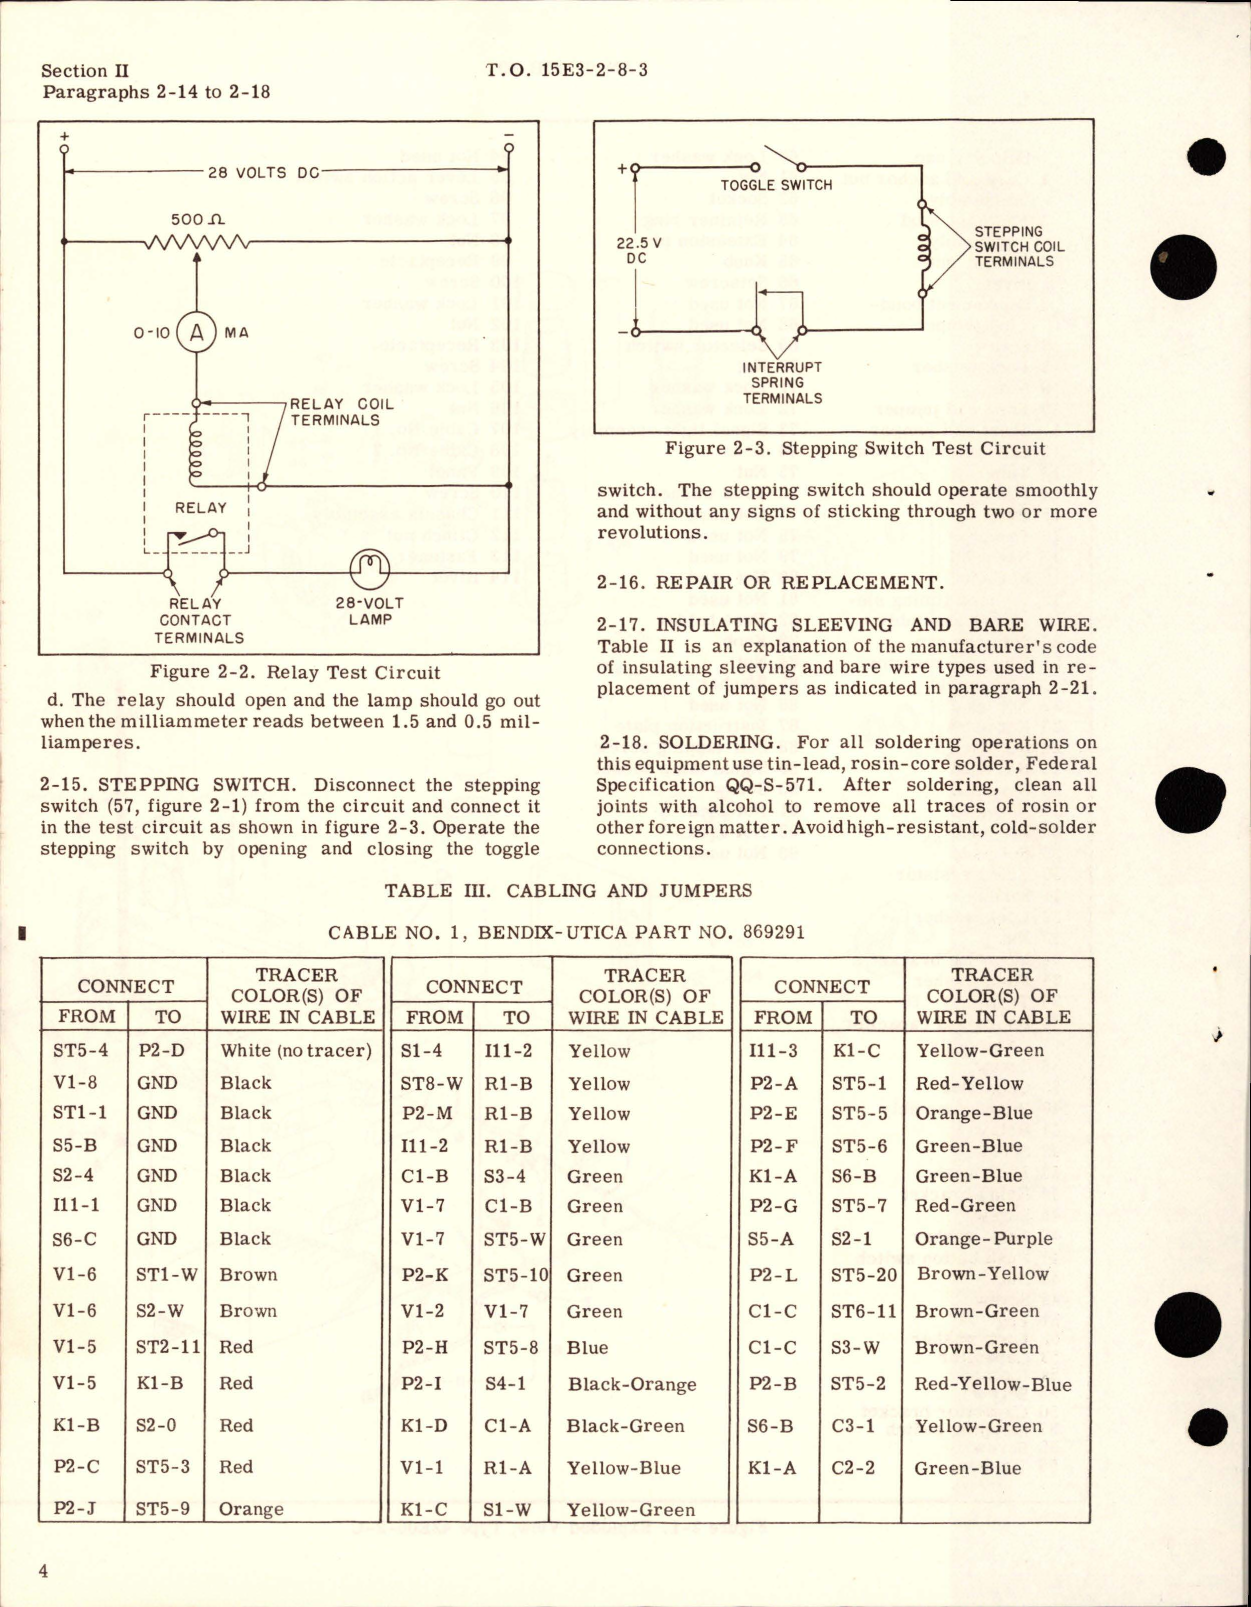 Sample page 8 from AirCorps Library document: Overhaul Instructions for Rotary Timers